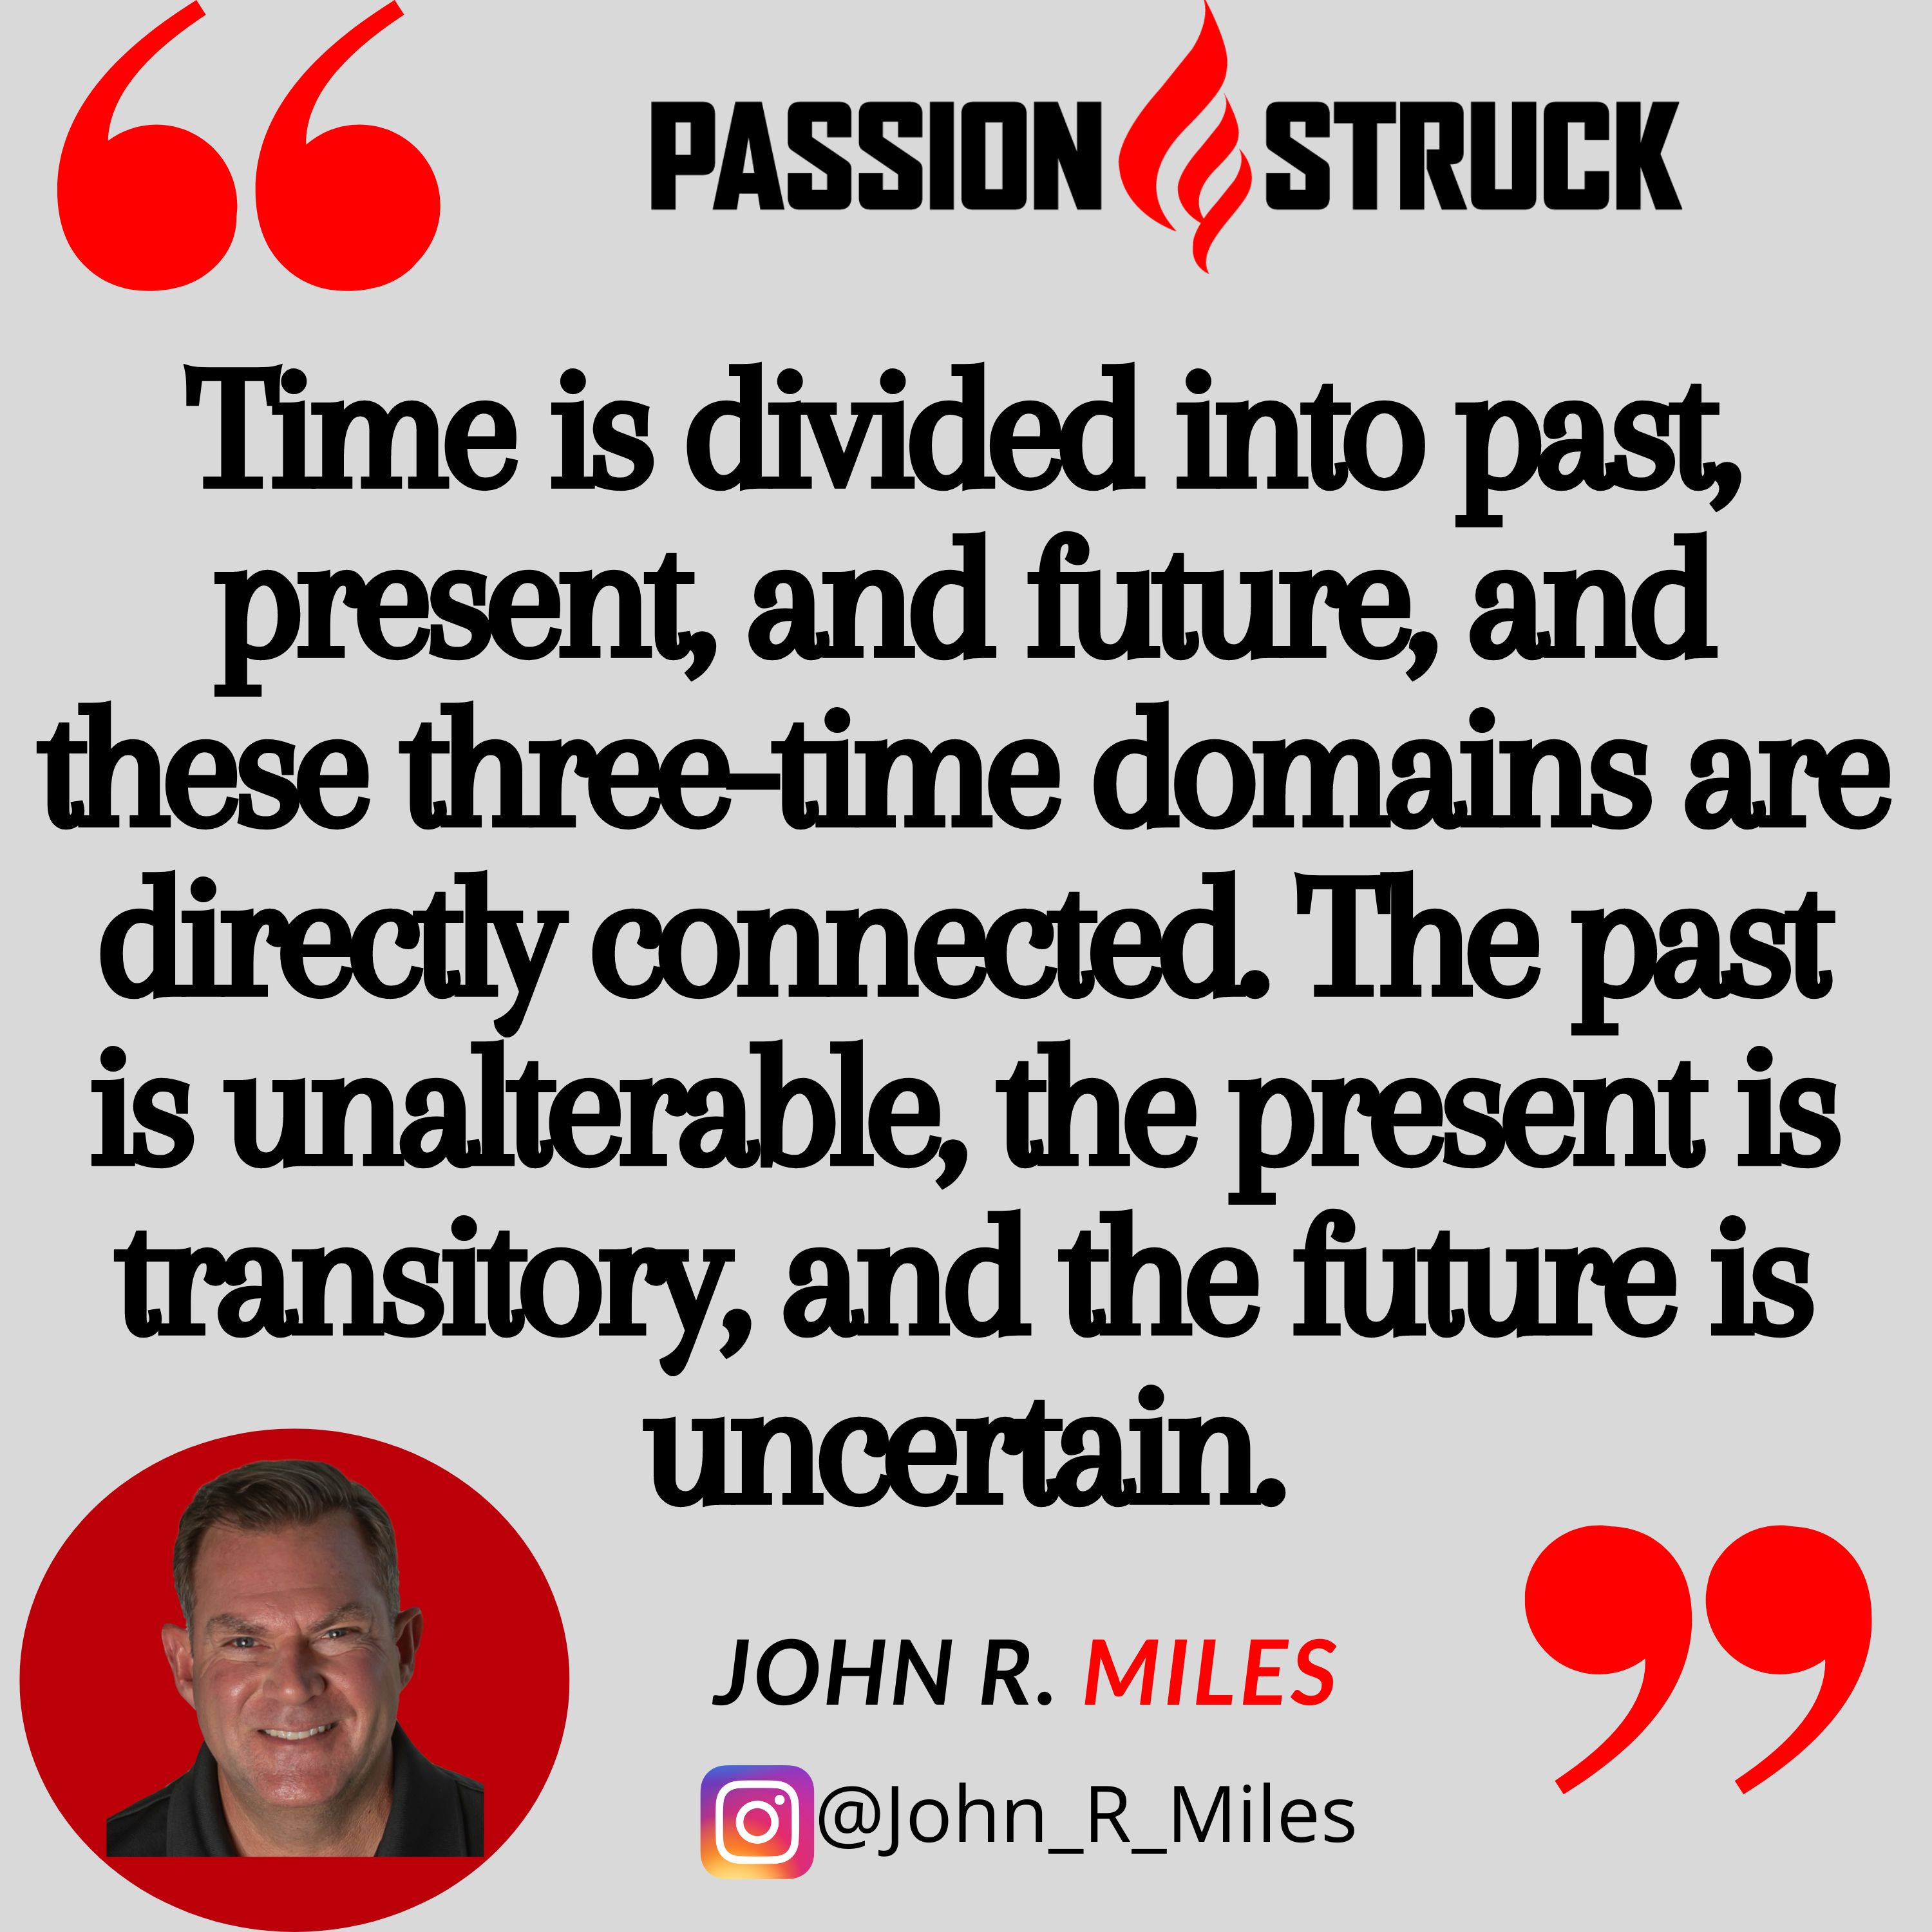 Quote by John R. Miles from passion struck podcast: Time is divided into past, present, and future, and these three-time domains are directly connected. The past is unalterable, the present is transitory, and the future is uncertain.